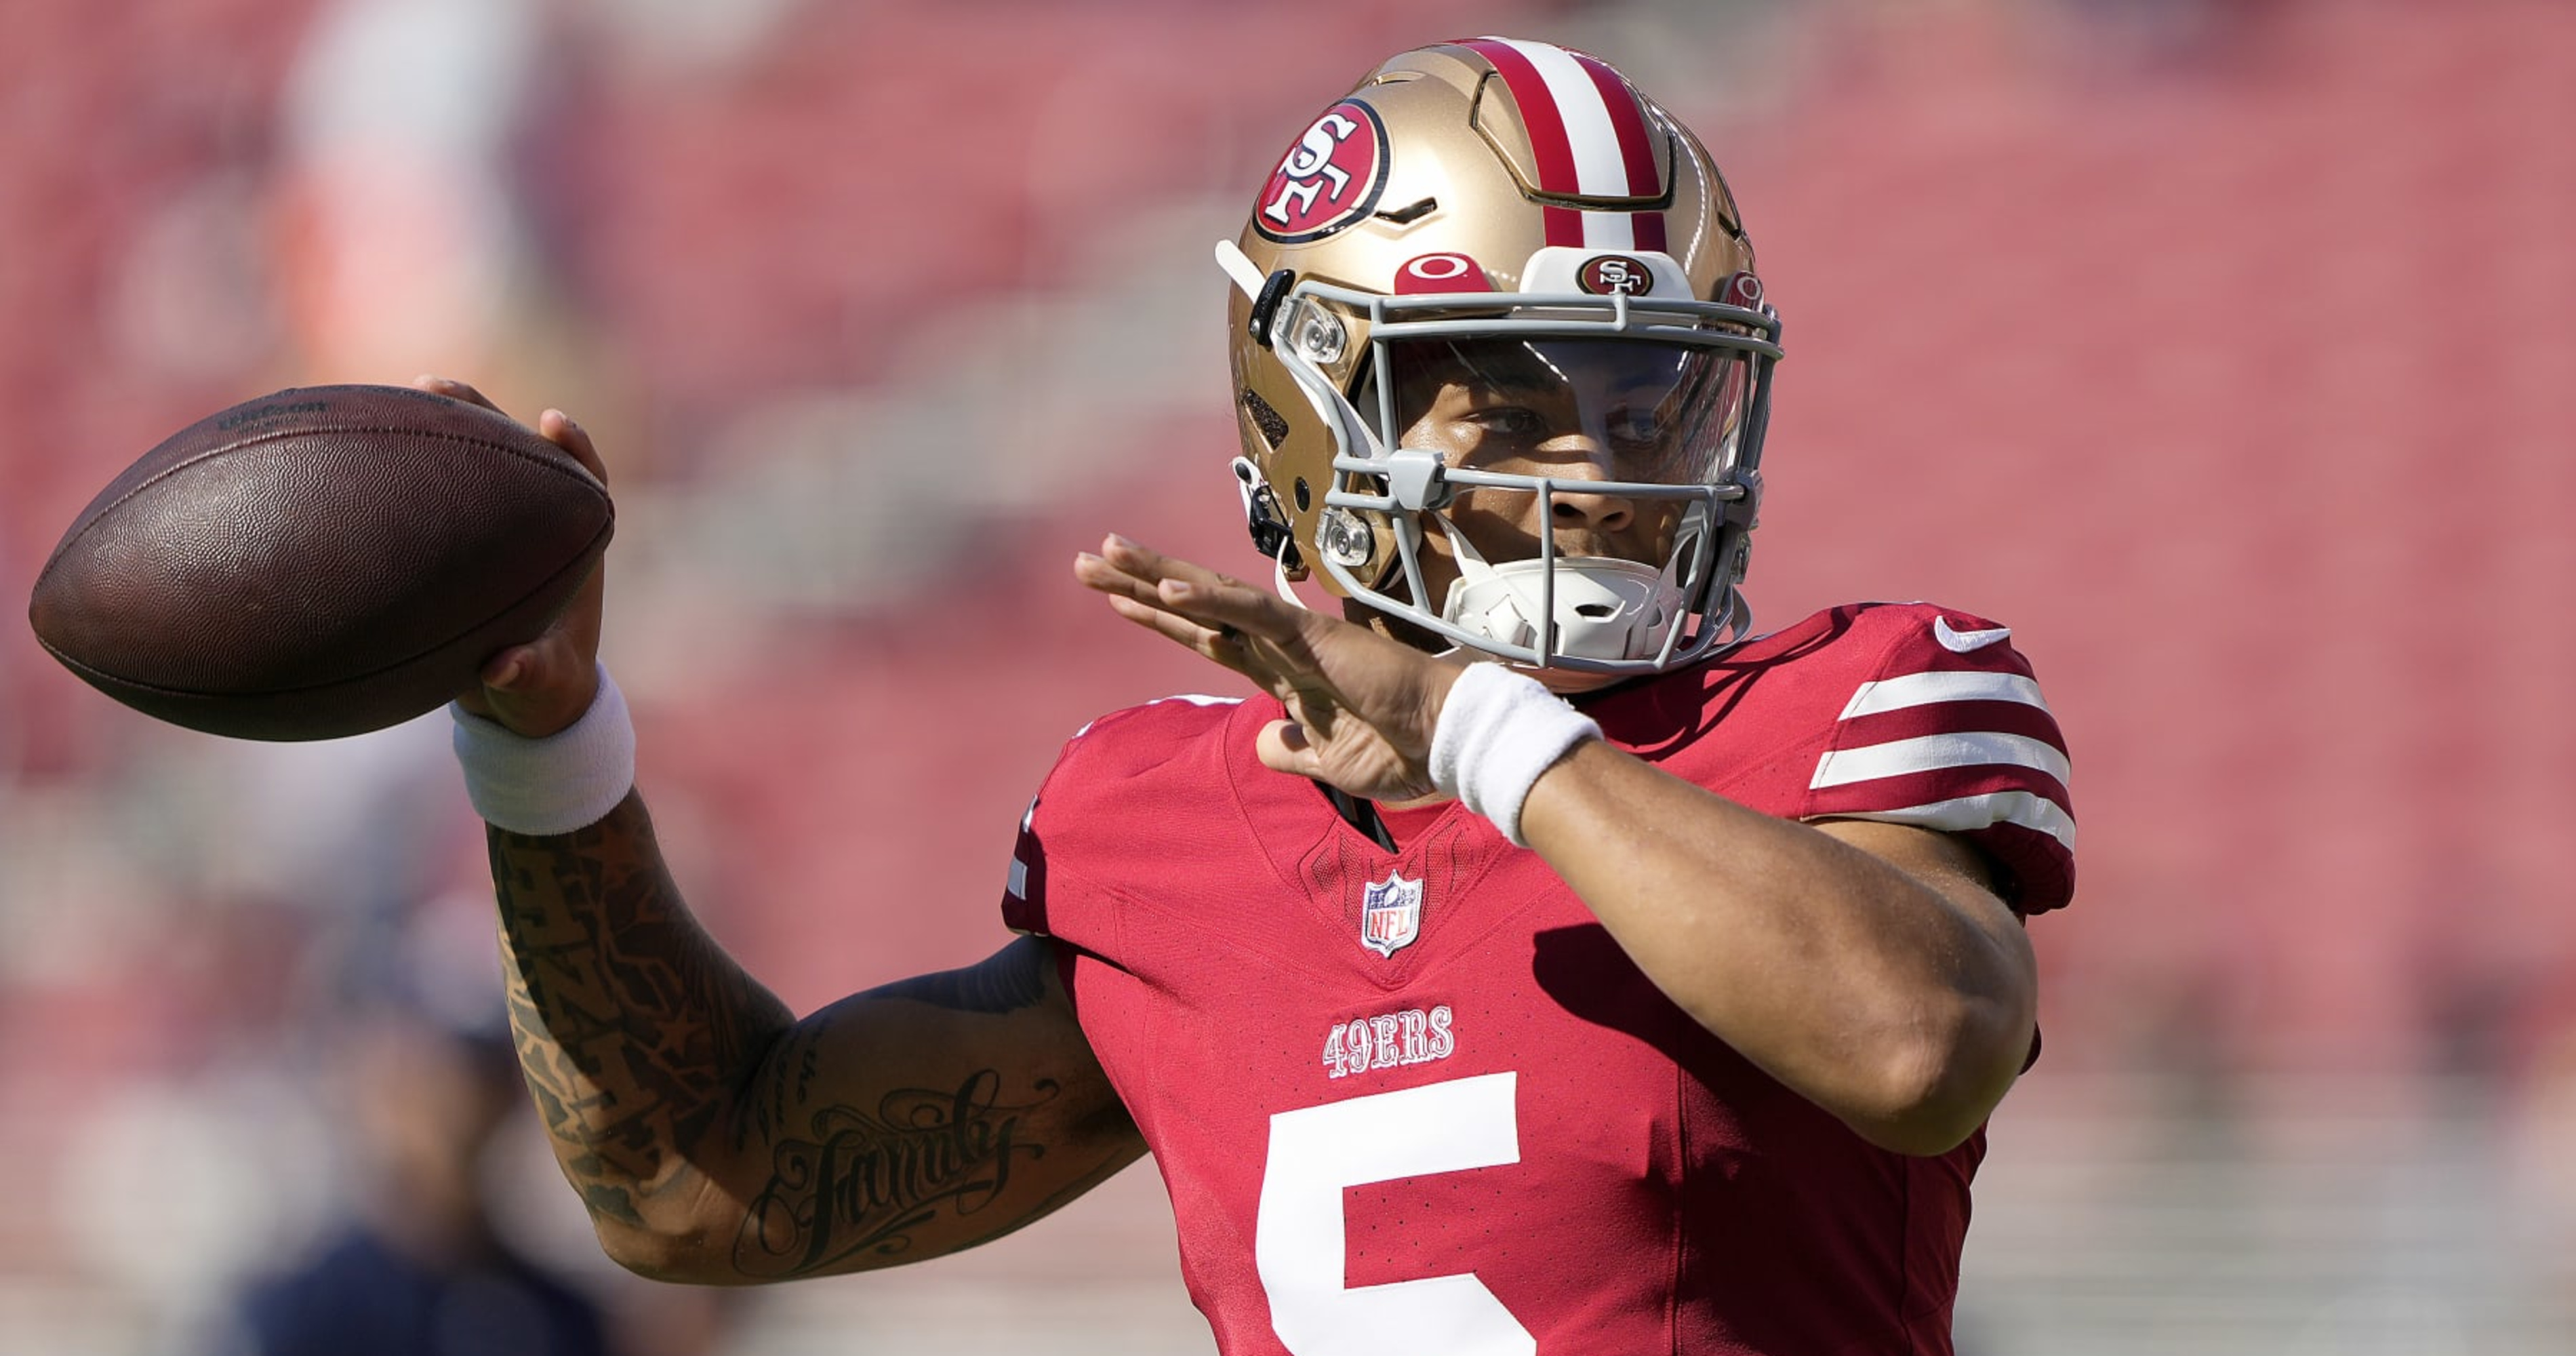 49ers' Trey Lance isn't untradeable, but discussions are infrequent